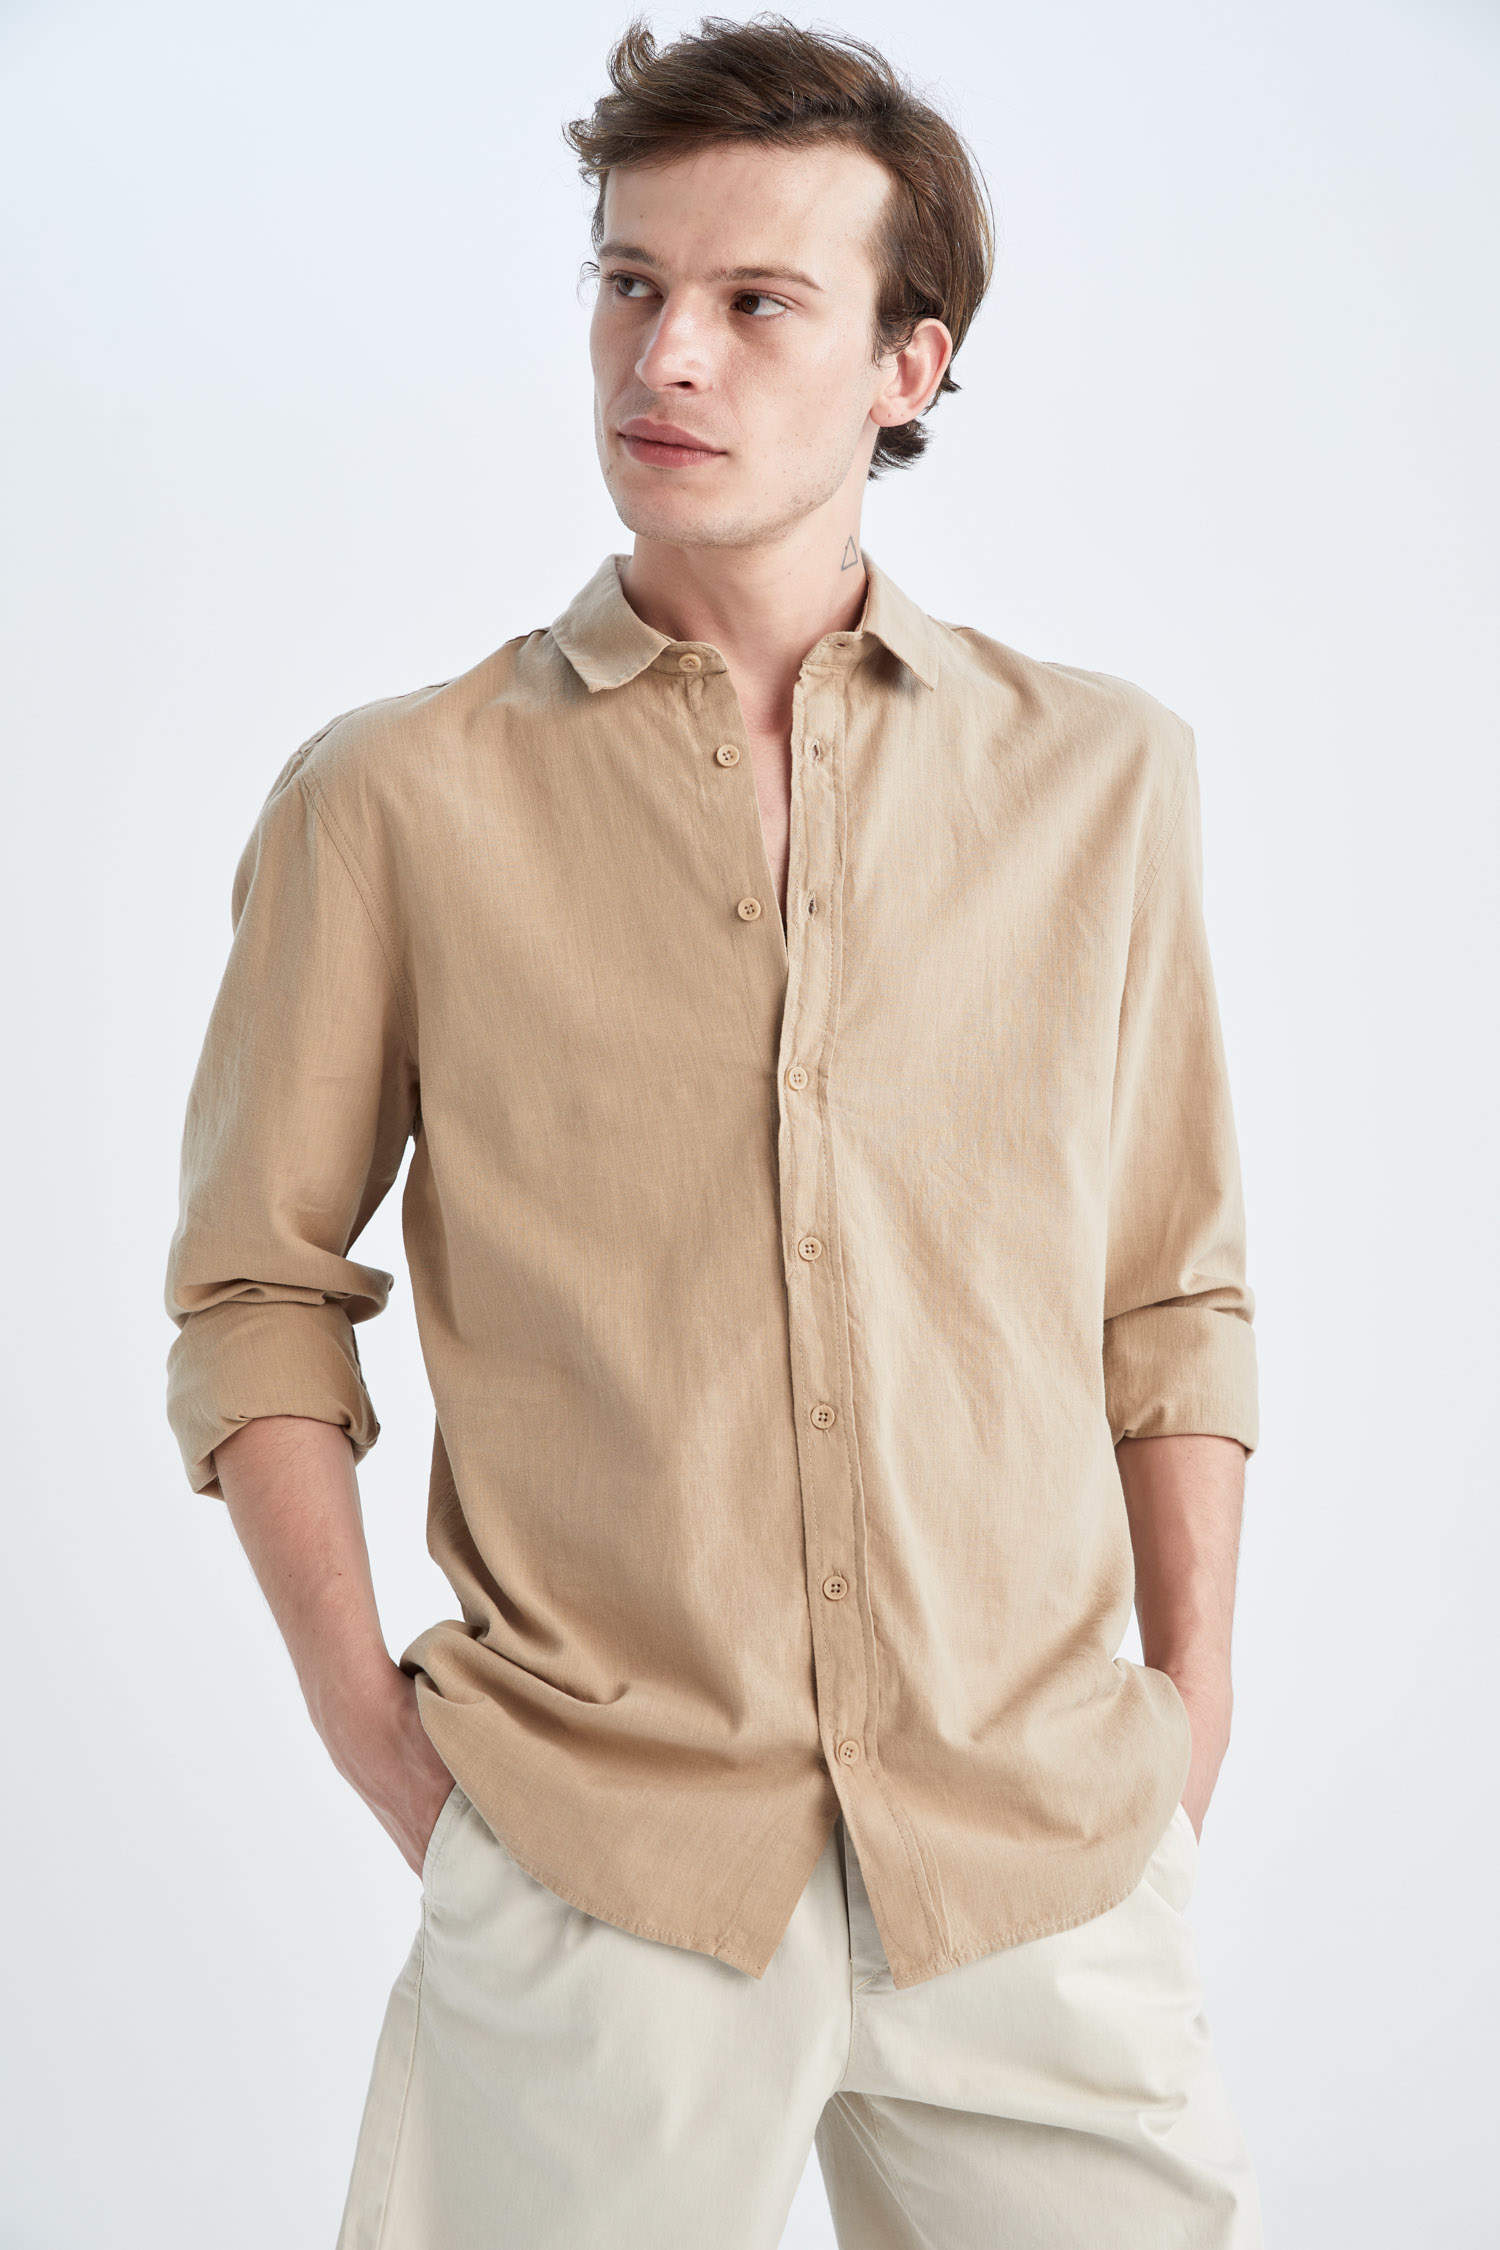 What Shirt Colors Go With Beige, Tan, And Cream Pants? • Ready Sleek